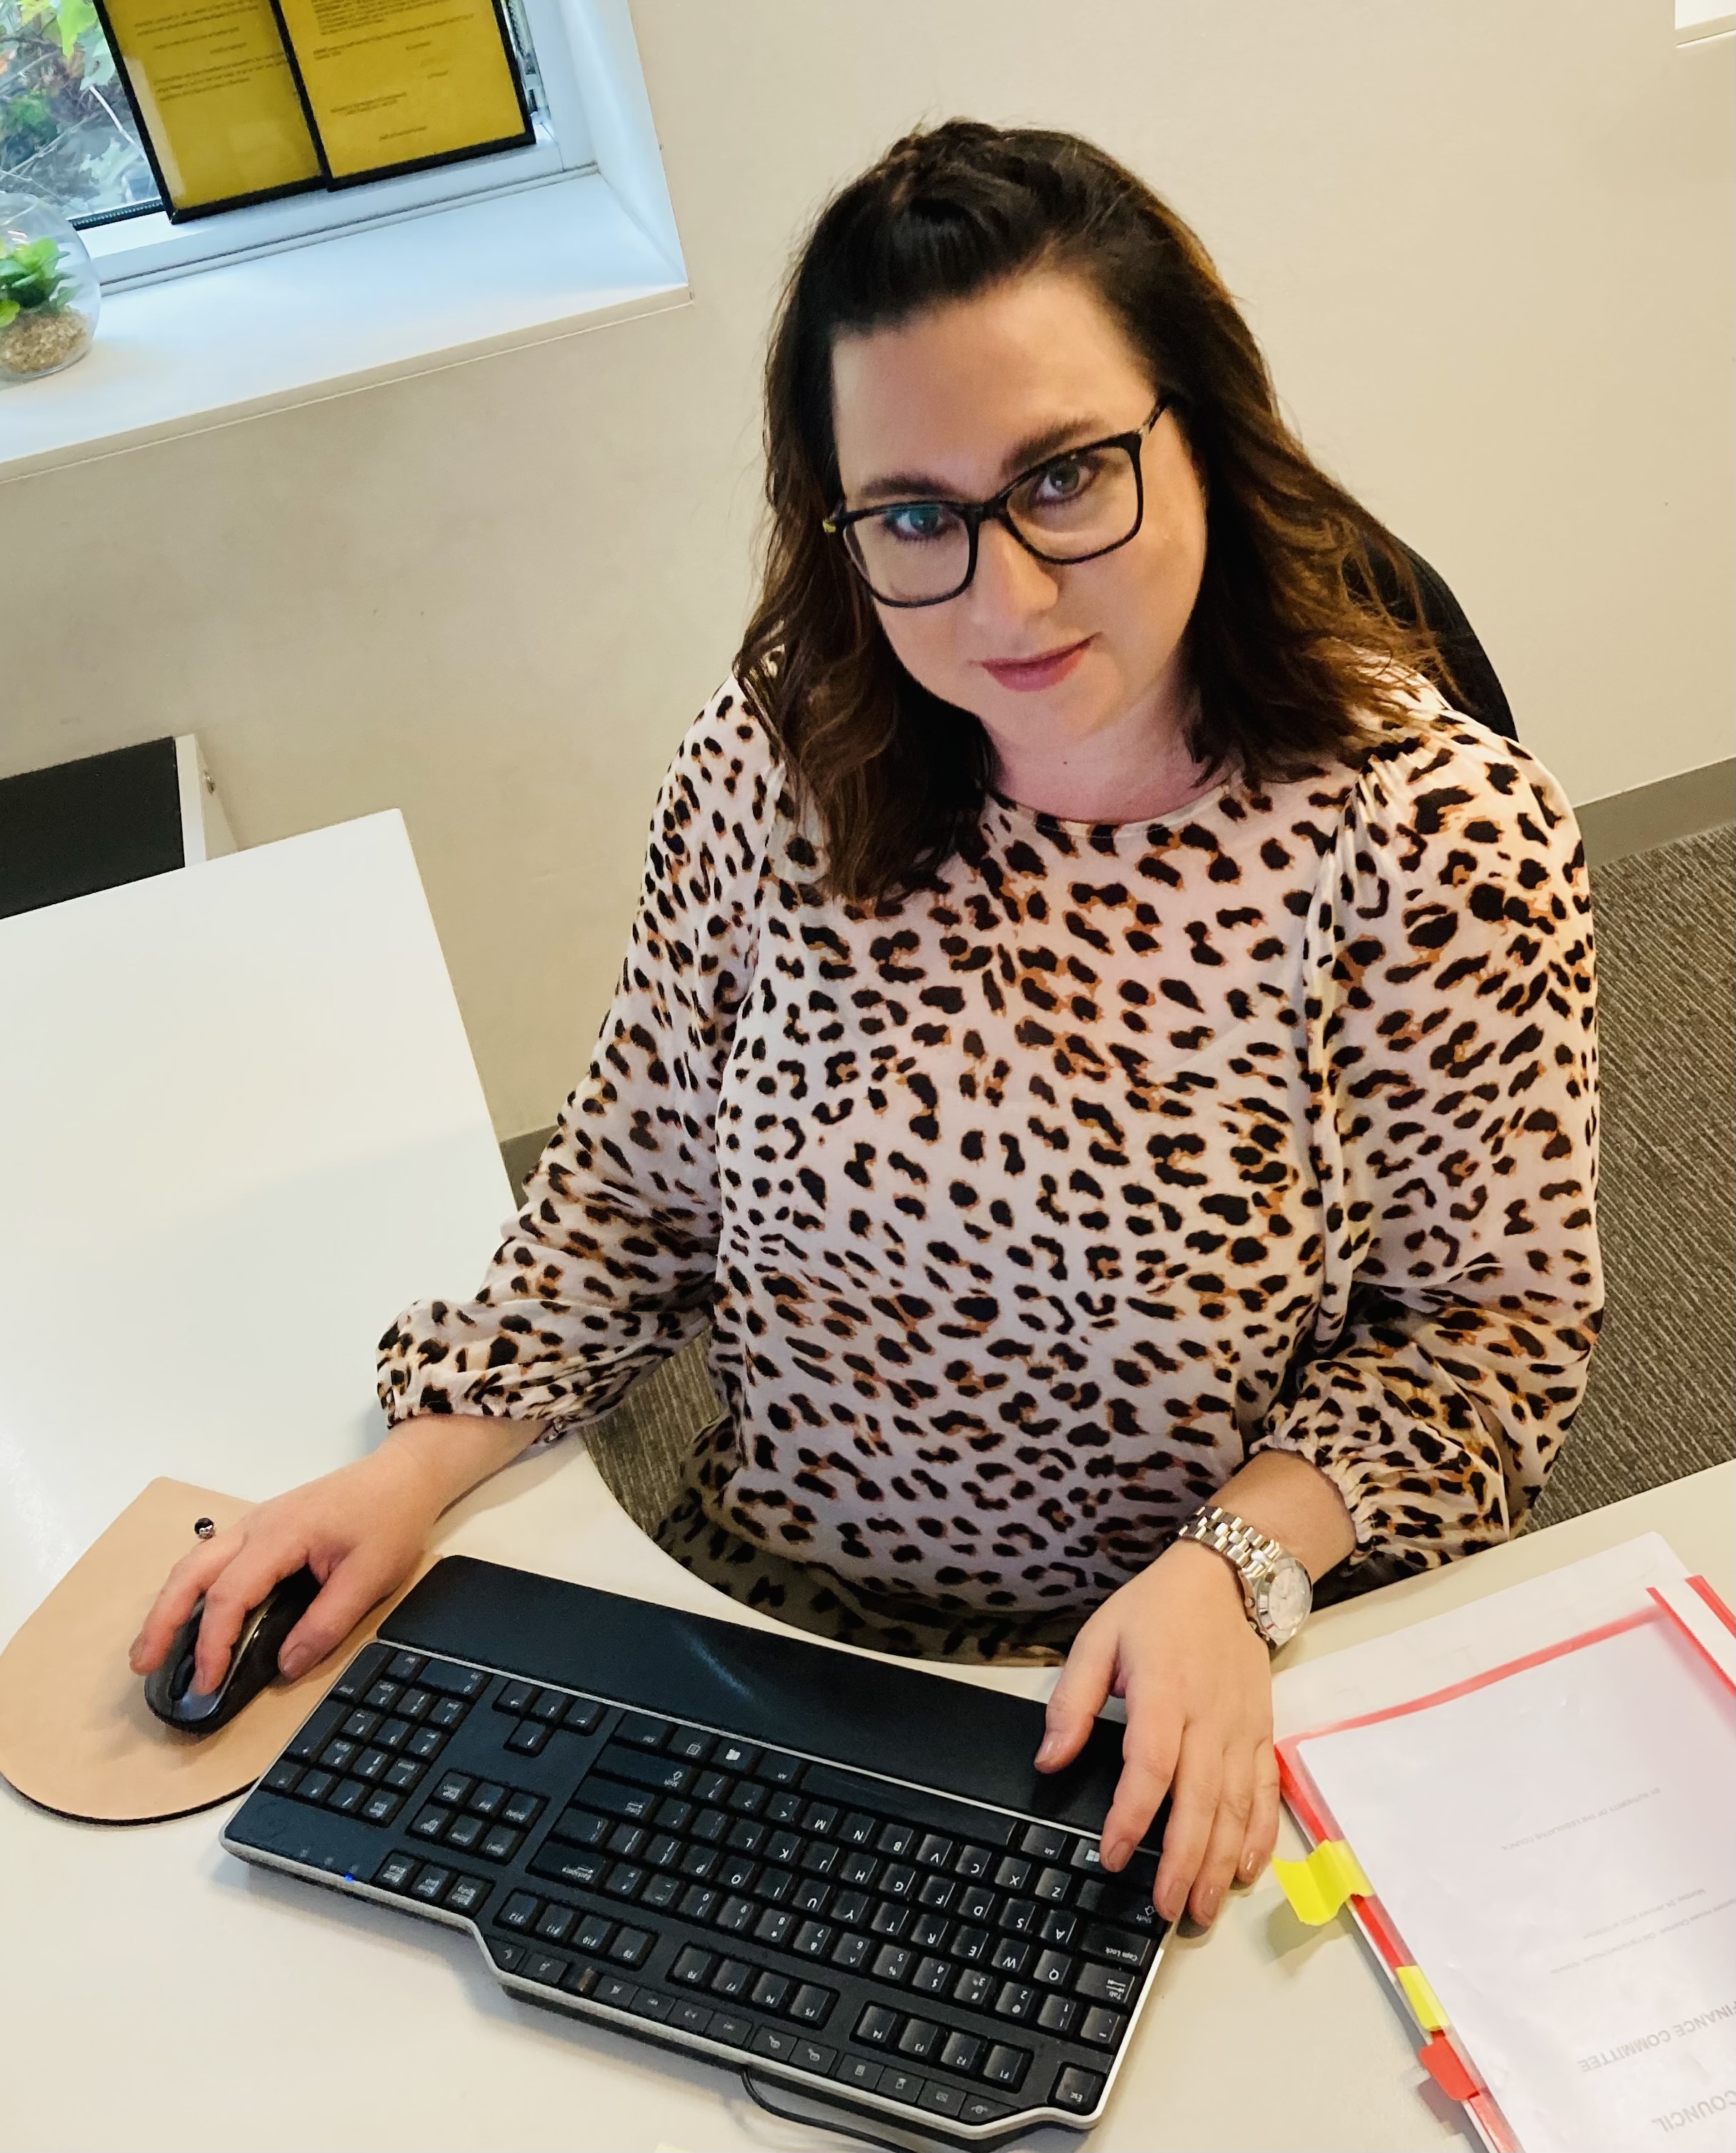 Angela is wearing her brunette hair in a half-up half-down style. She is wearing black framed glasses and a leopard print blouse. On her right hand is a silver watch and next to her hand is a computer mouse and keyboard. She is looking up at the camera smiling.